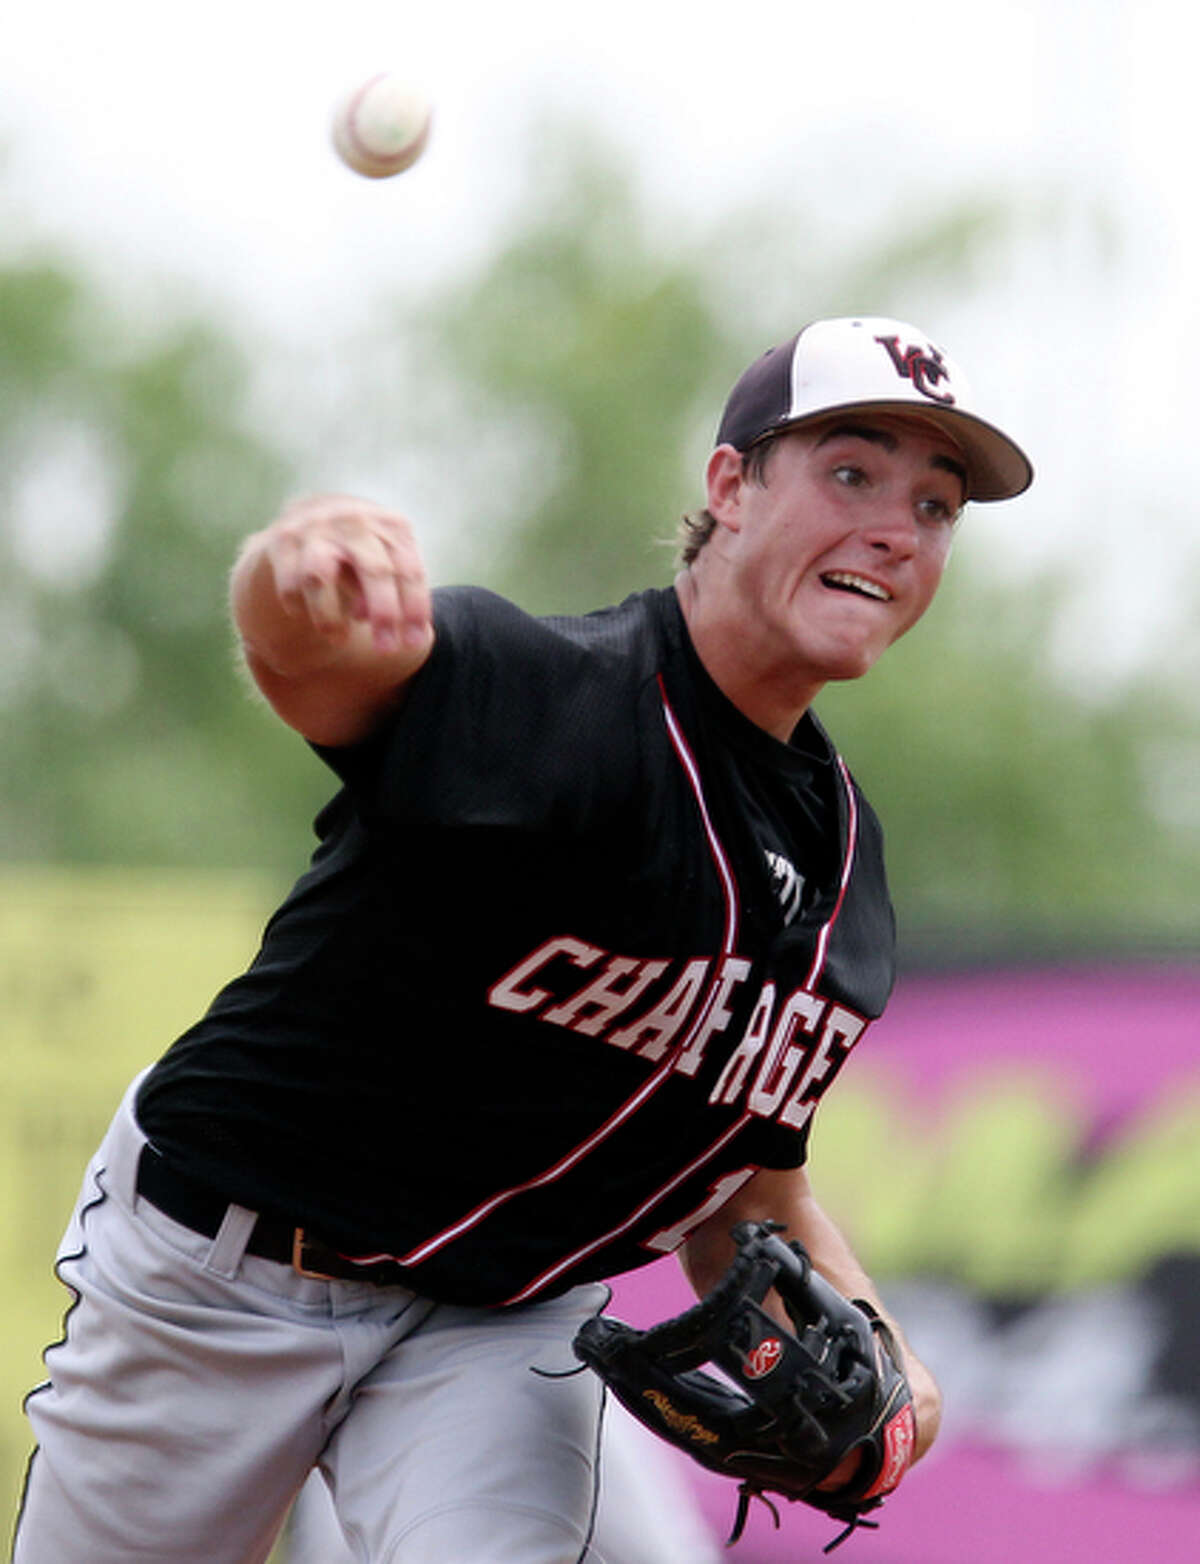 Churchill pitcher Reed Kirksey pitched eight innings against Corpus Christi-Carroll in Game 2 of the Region IV-5A baseball final in Robstown, Texas on Saturday, June 5, 2010. The Chargers ended their playoff run with a 3-4 loss to the Wildcats. Kin Man Hui/kmhui@express-news.net